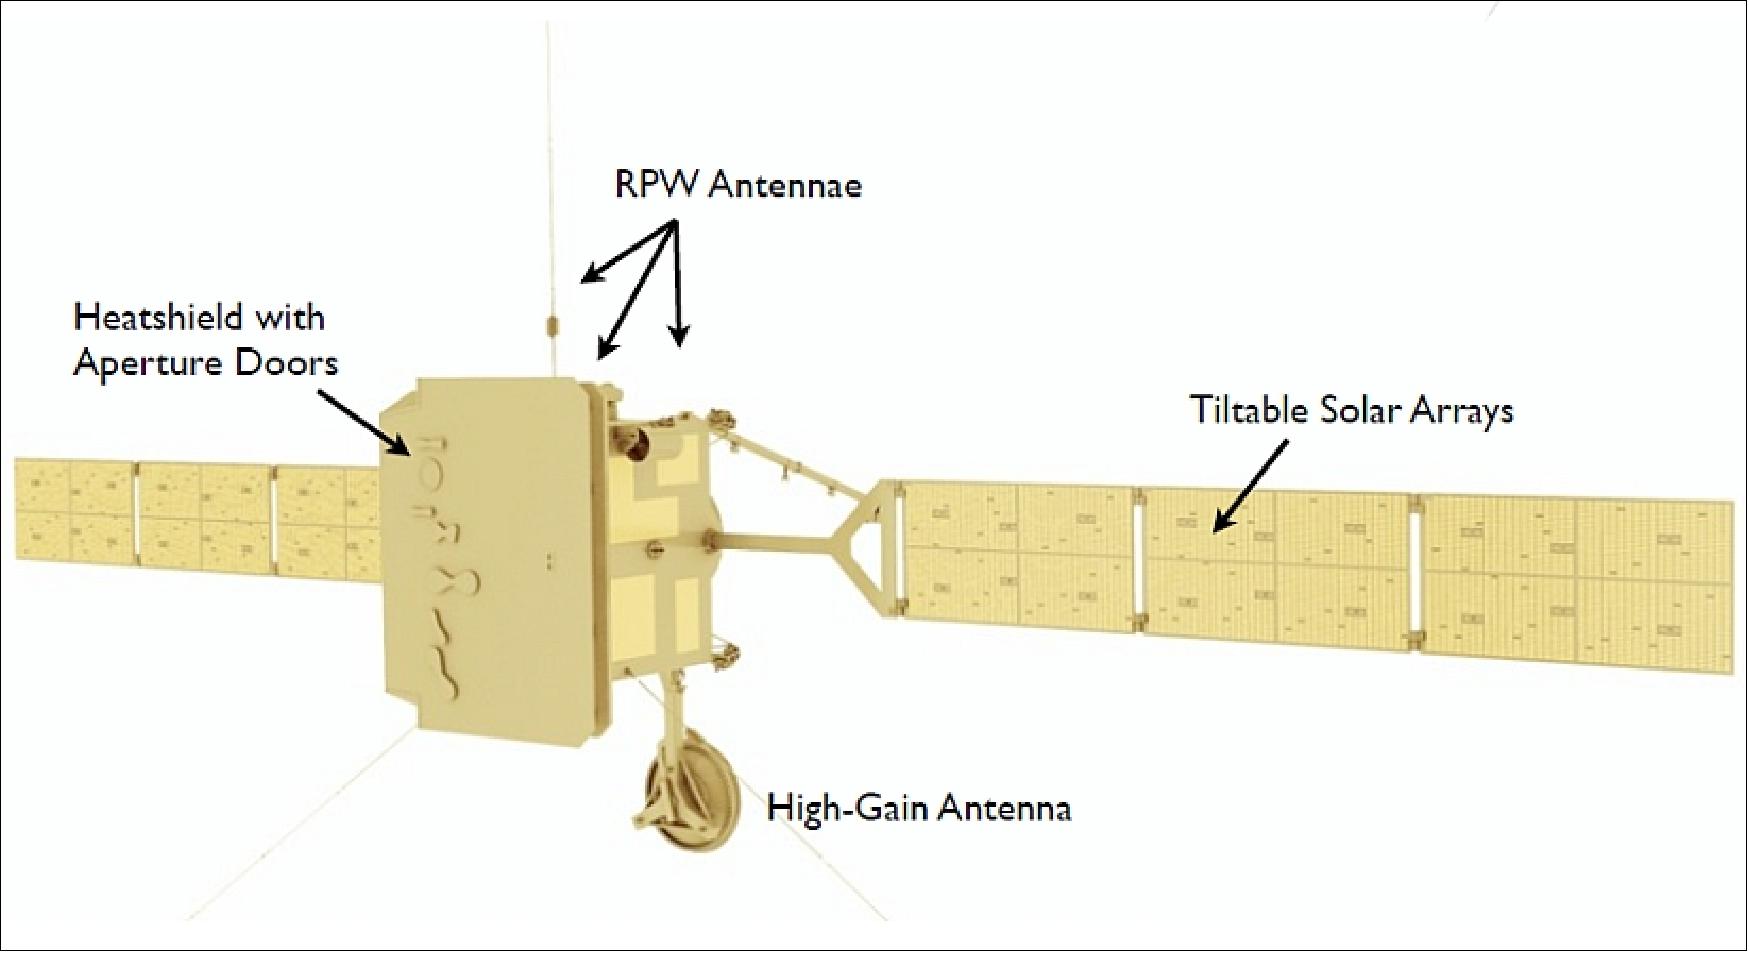 Figure 3: Front view of the Solar Orbiter spacecraft configuration with the three RPW antennas, high-gain antenna, instrument boom and solar arrays deployed (image credit: ESA) 26)